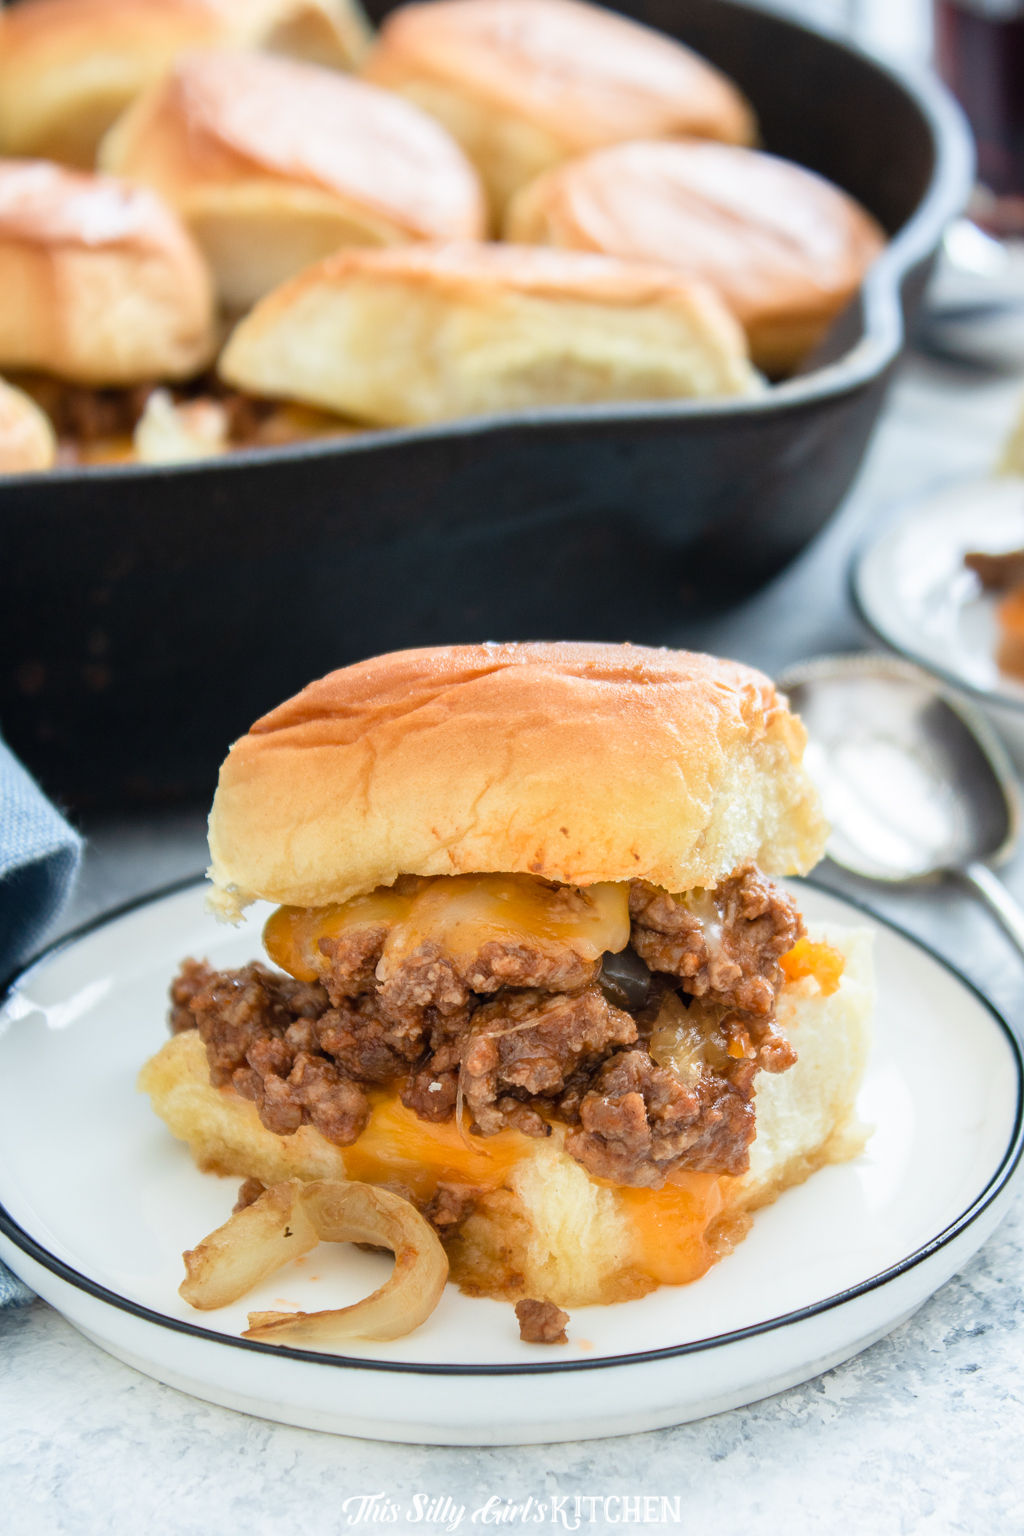 Sloppy Joe Sliders: Sloppy joe mix on top of slider buns with melty cheese and caramelized onions, baked until bubbly. #recipe from thissillygirlskitchen.com #sloppyjoe #sliders #gamedayfood 